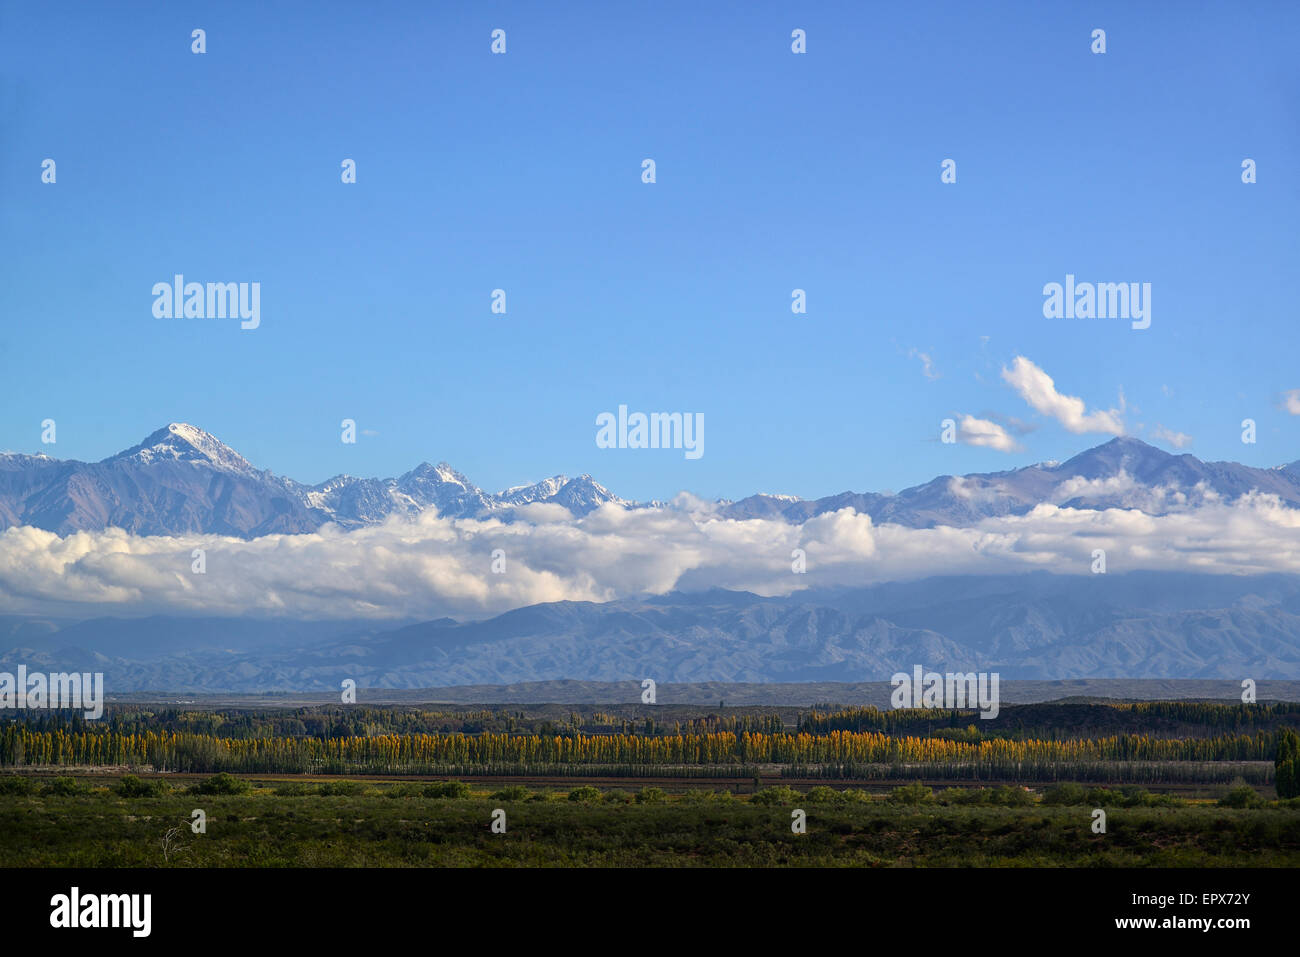 Argentina, Mendoza, View of Andes Mountains across Uco Valley Stock Photo